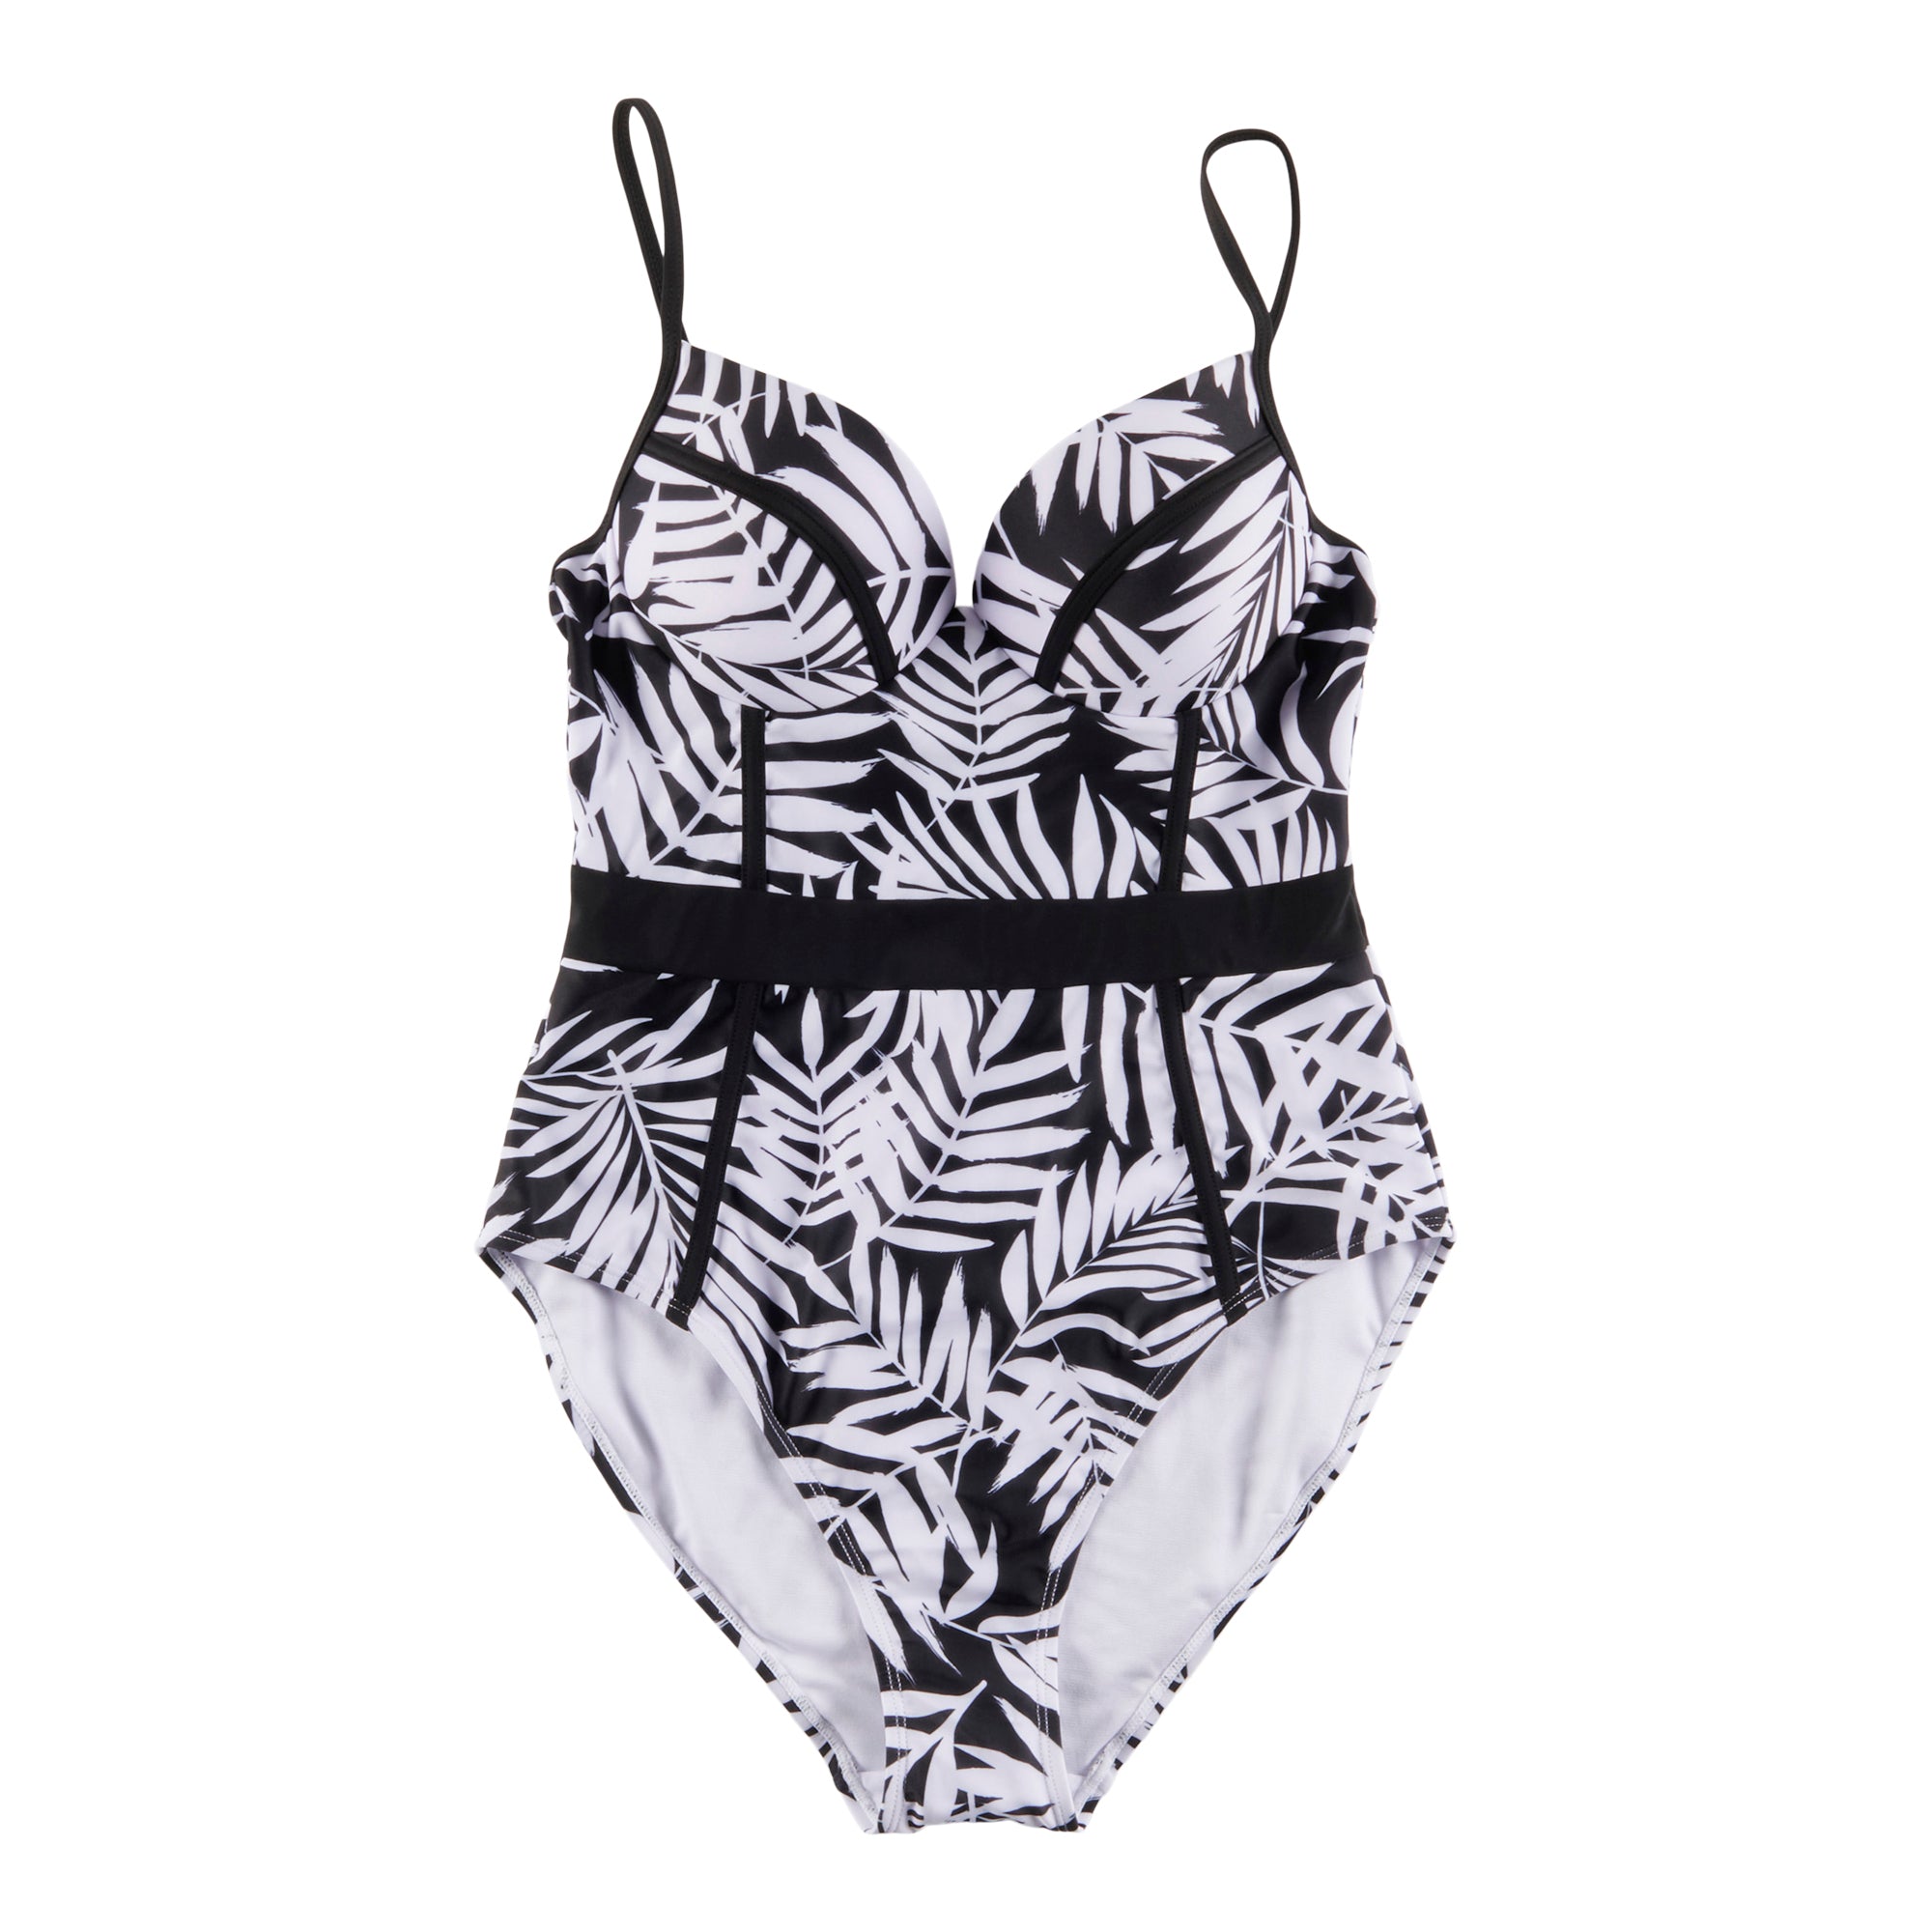 ACX Active Women's Festival Swimsuit, Black and White – Giant Tiger